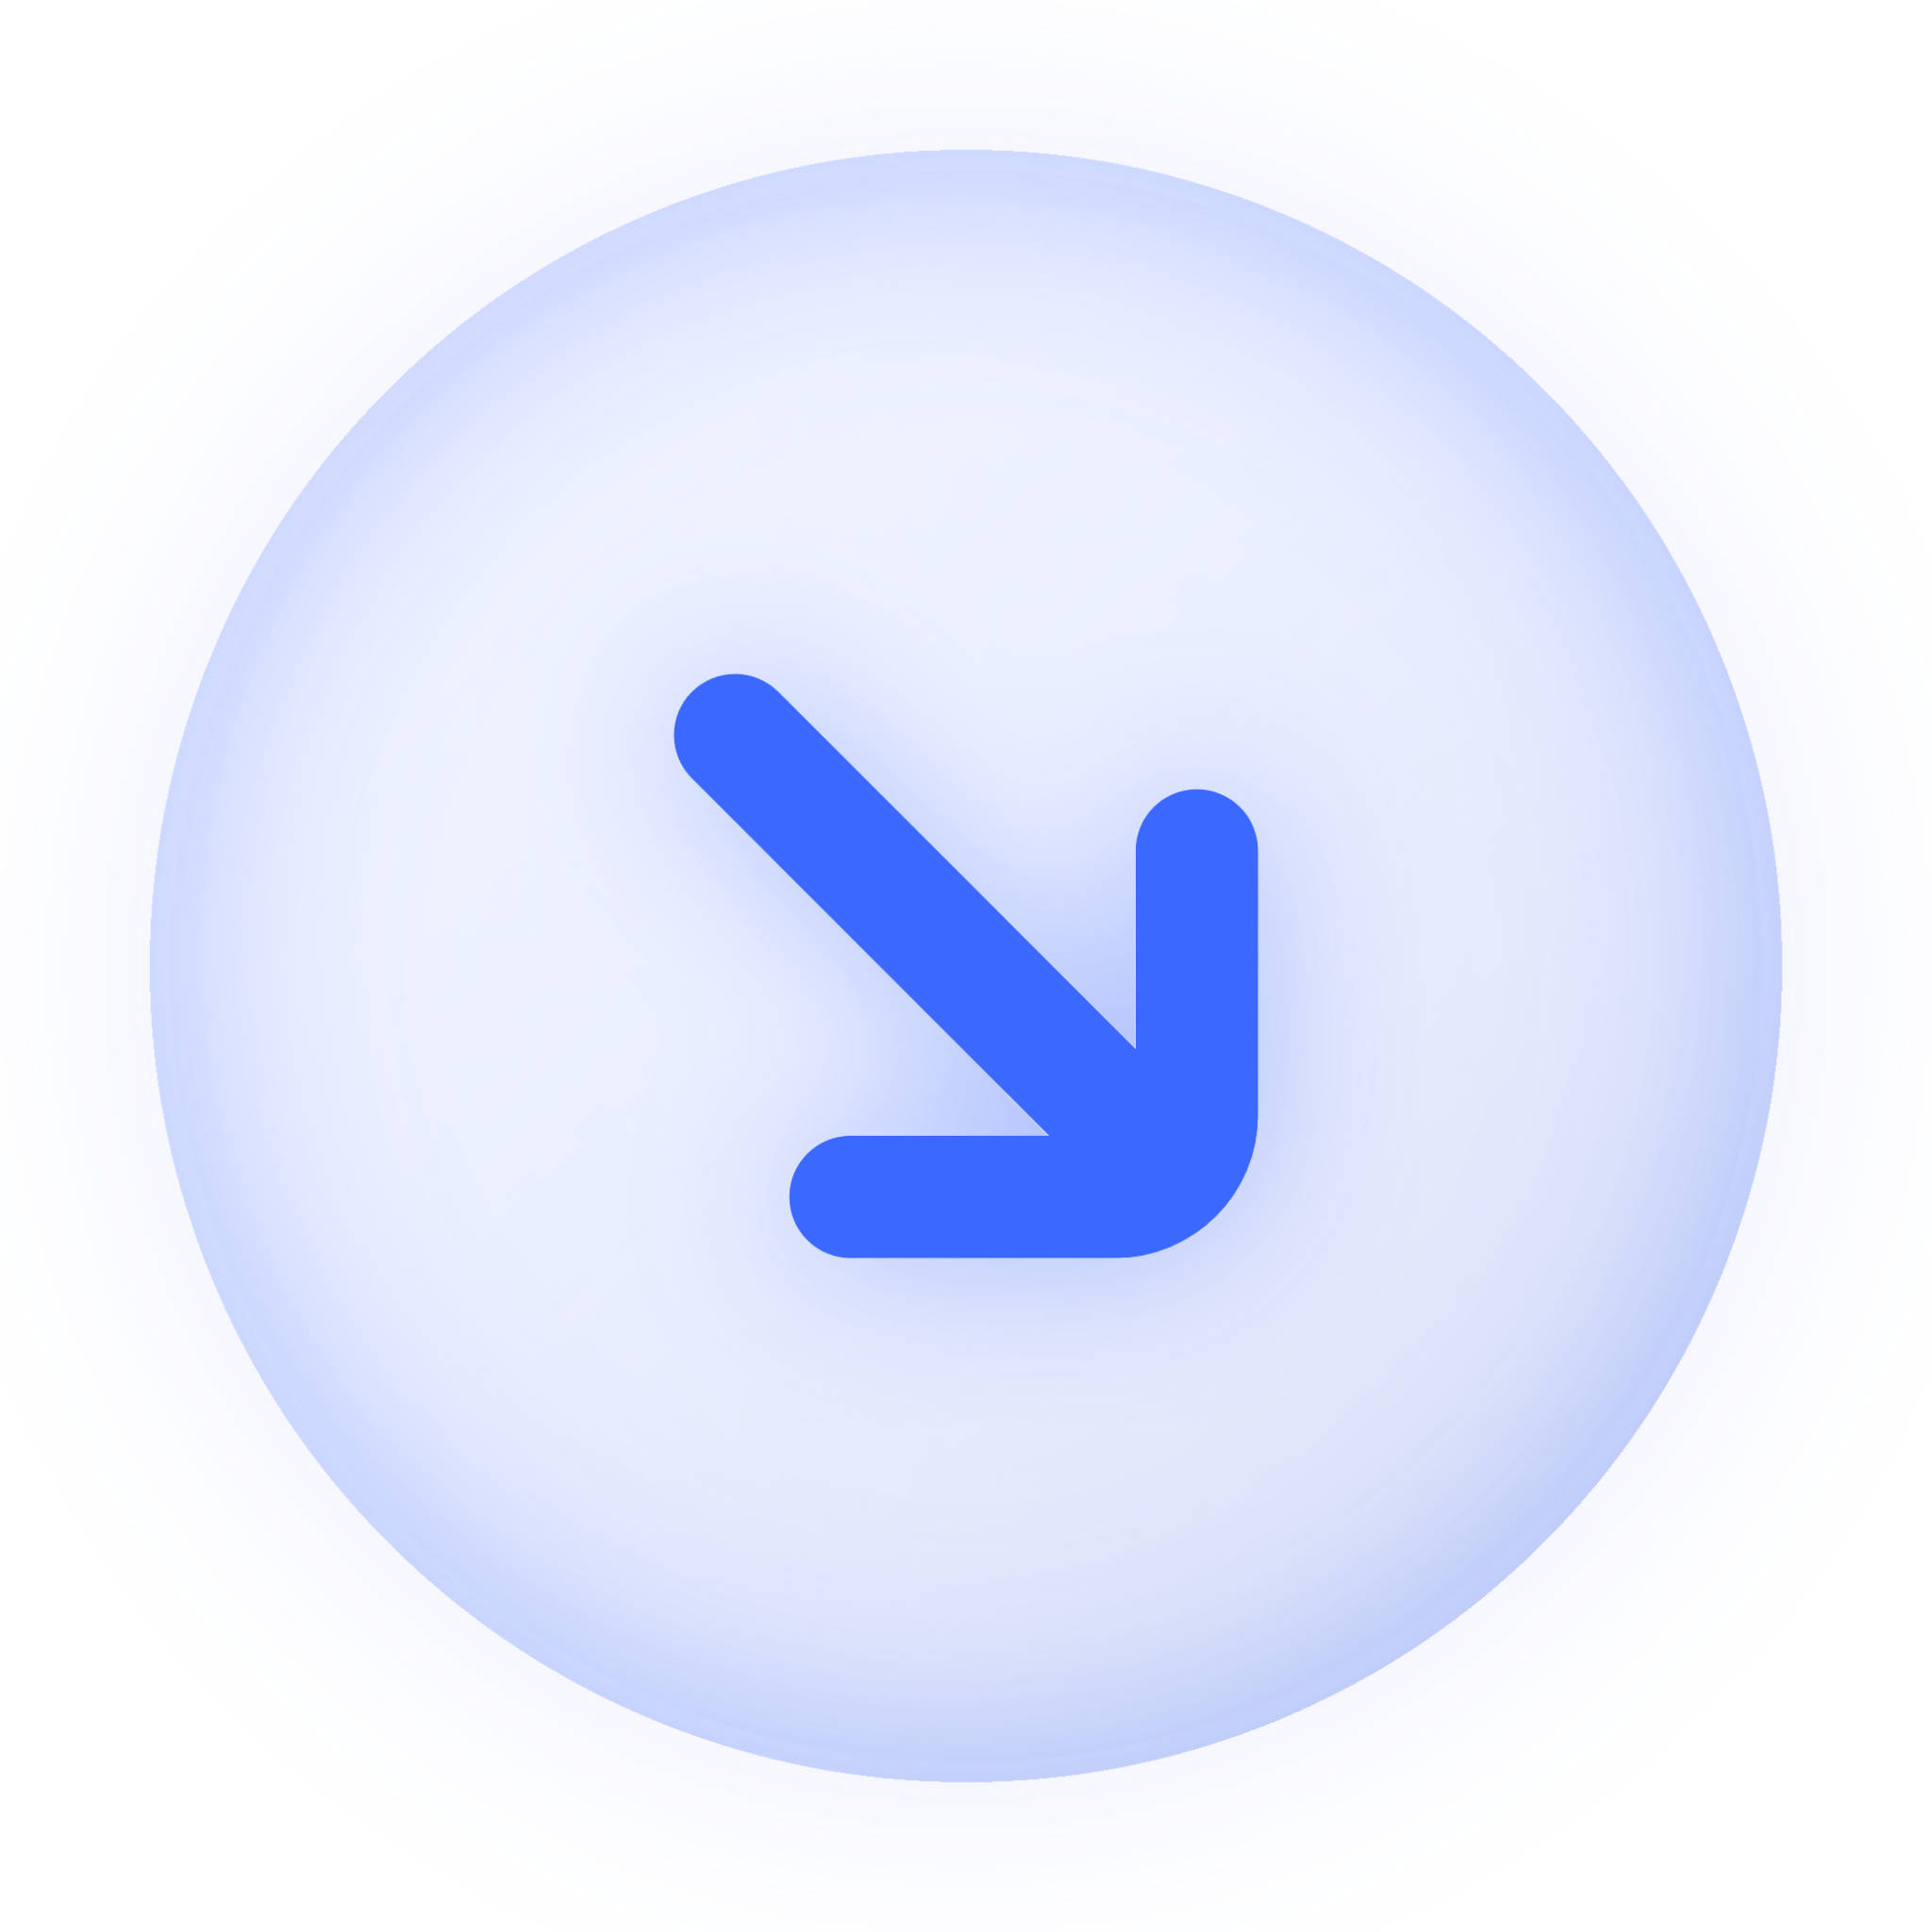 down right circle icon